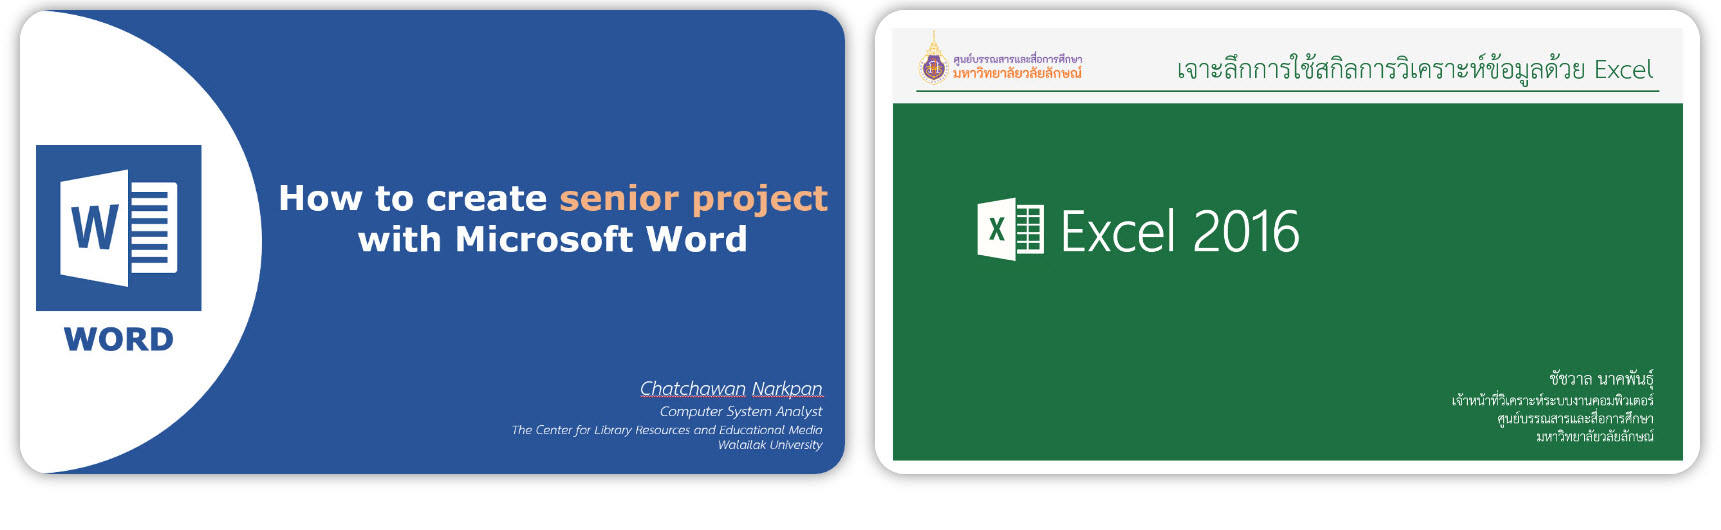 Word&Excel Cover